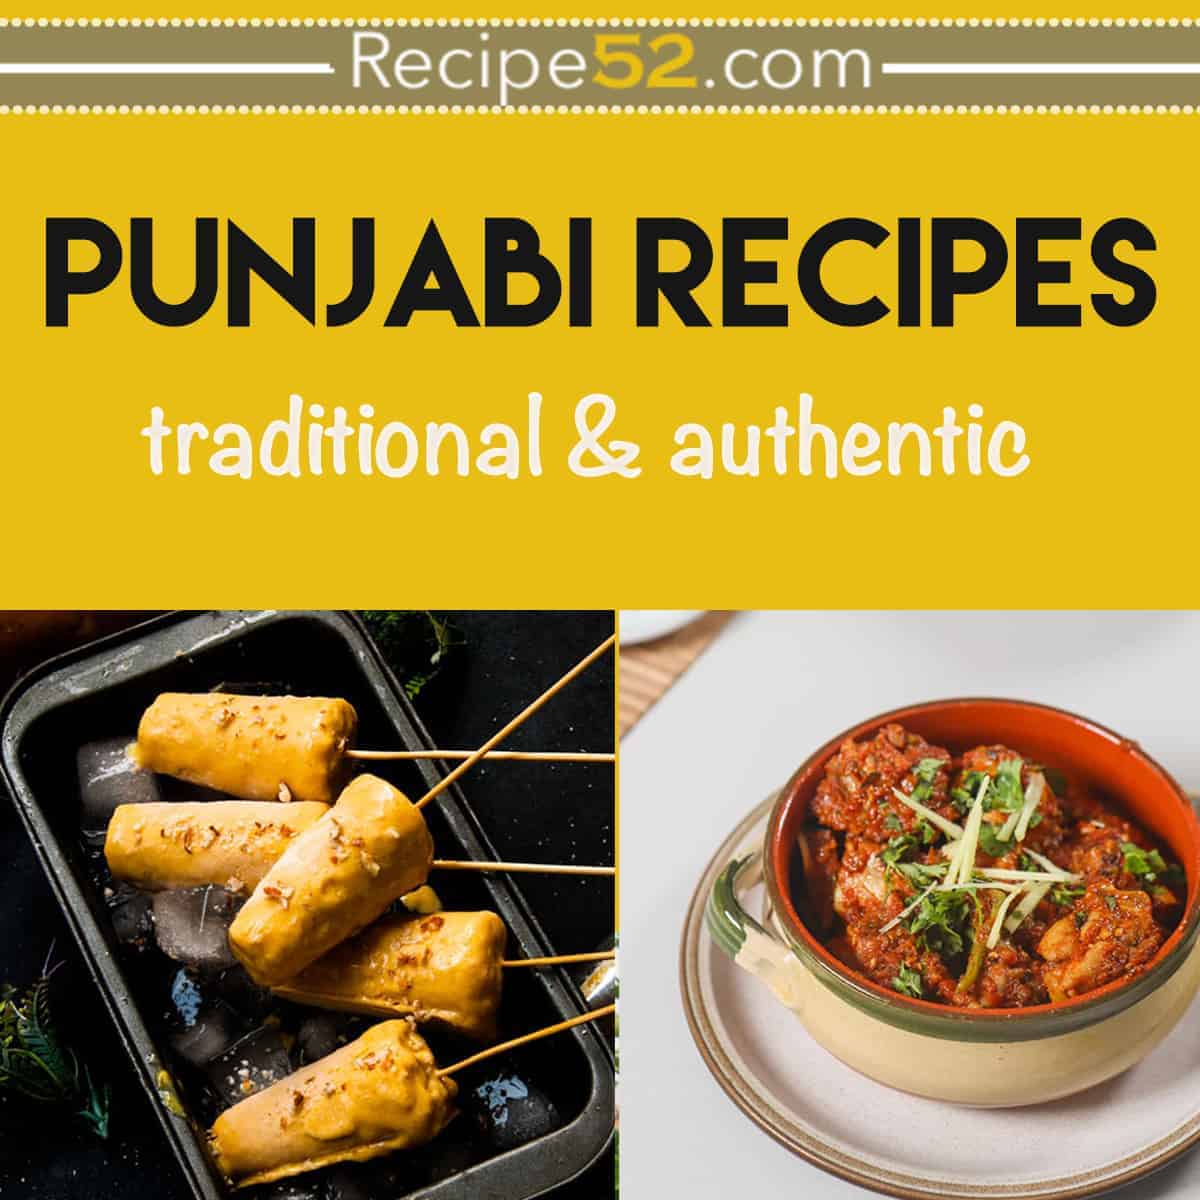 Made In Punjab: Serving Memories, Not Just Food I Restaurant review